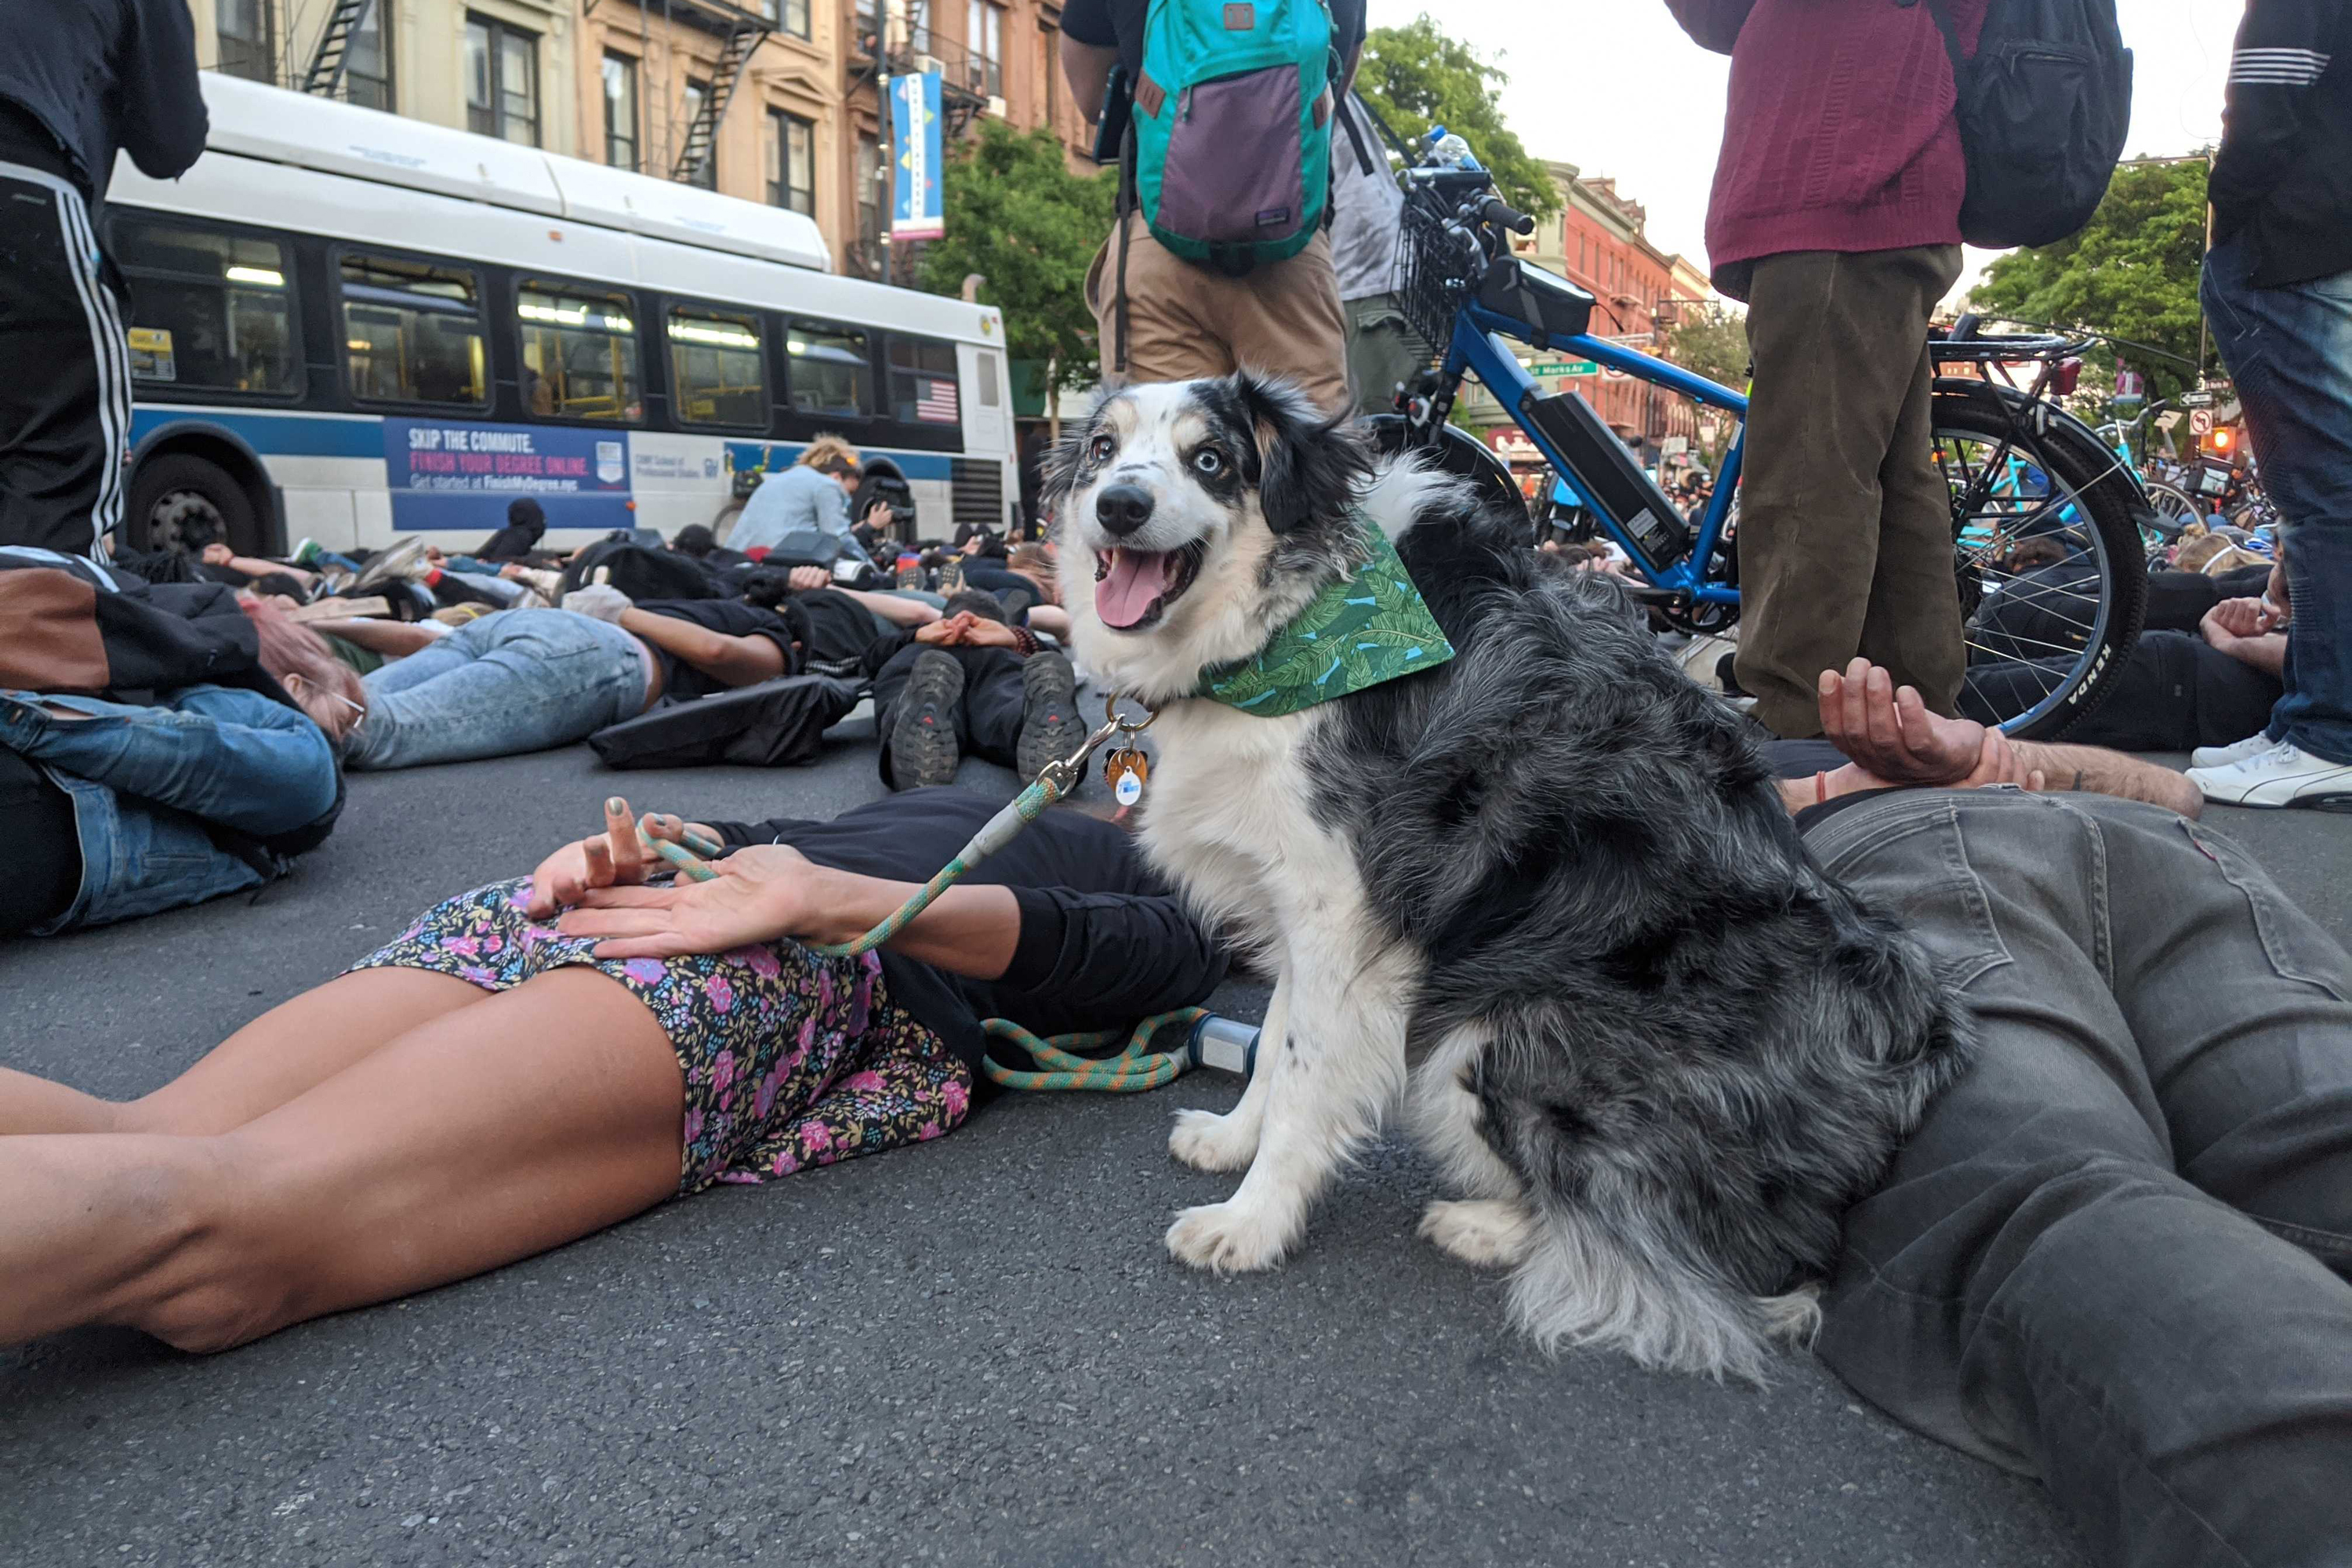 Sarah Green, left, lays with protesters on Flatbush Avenue on Sunday night, joined by her dog, Harlem, May 31, 2020.